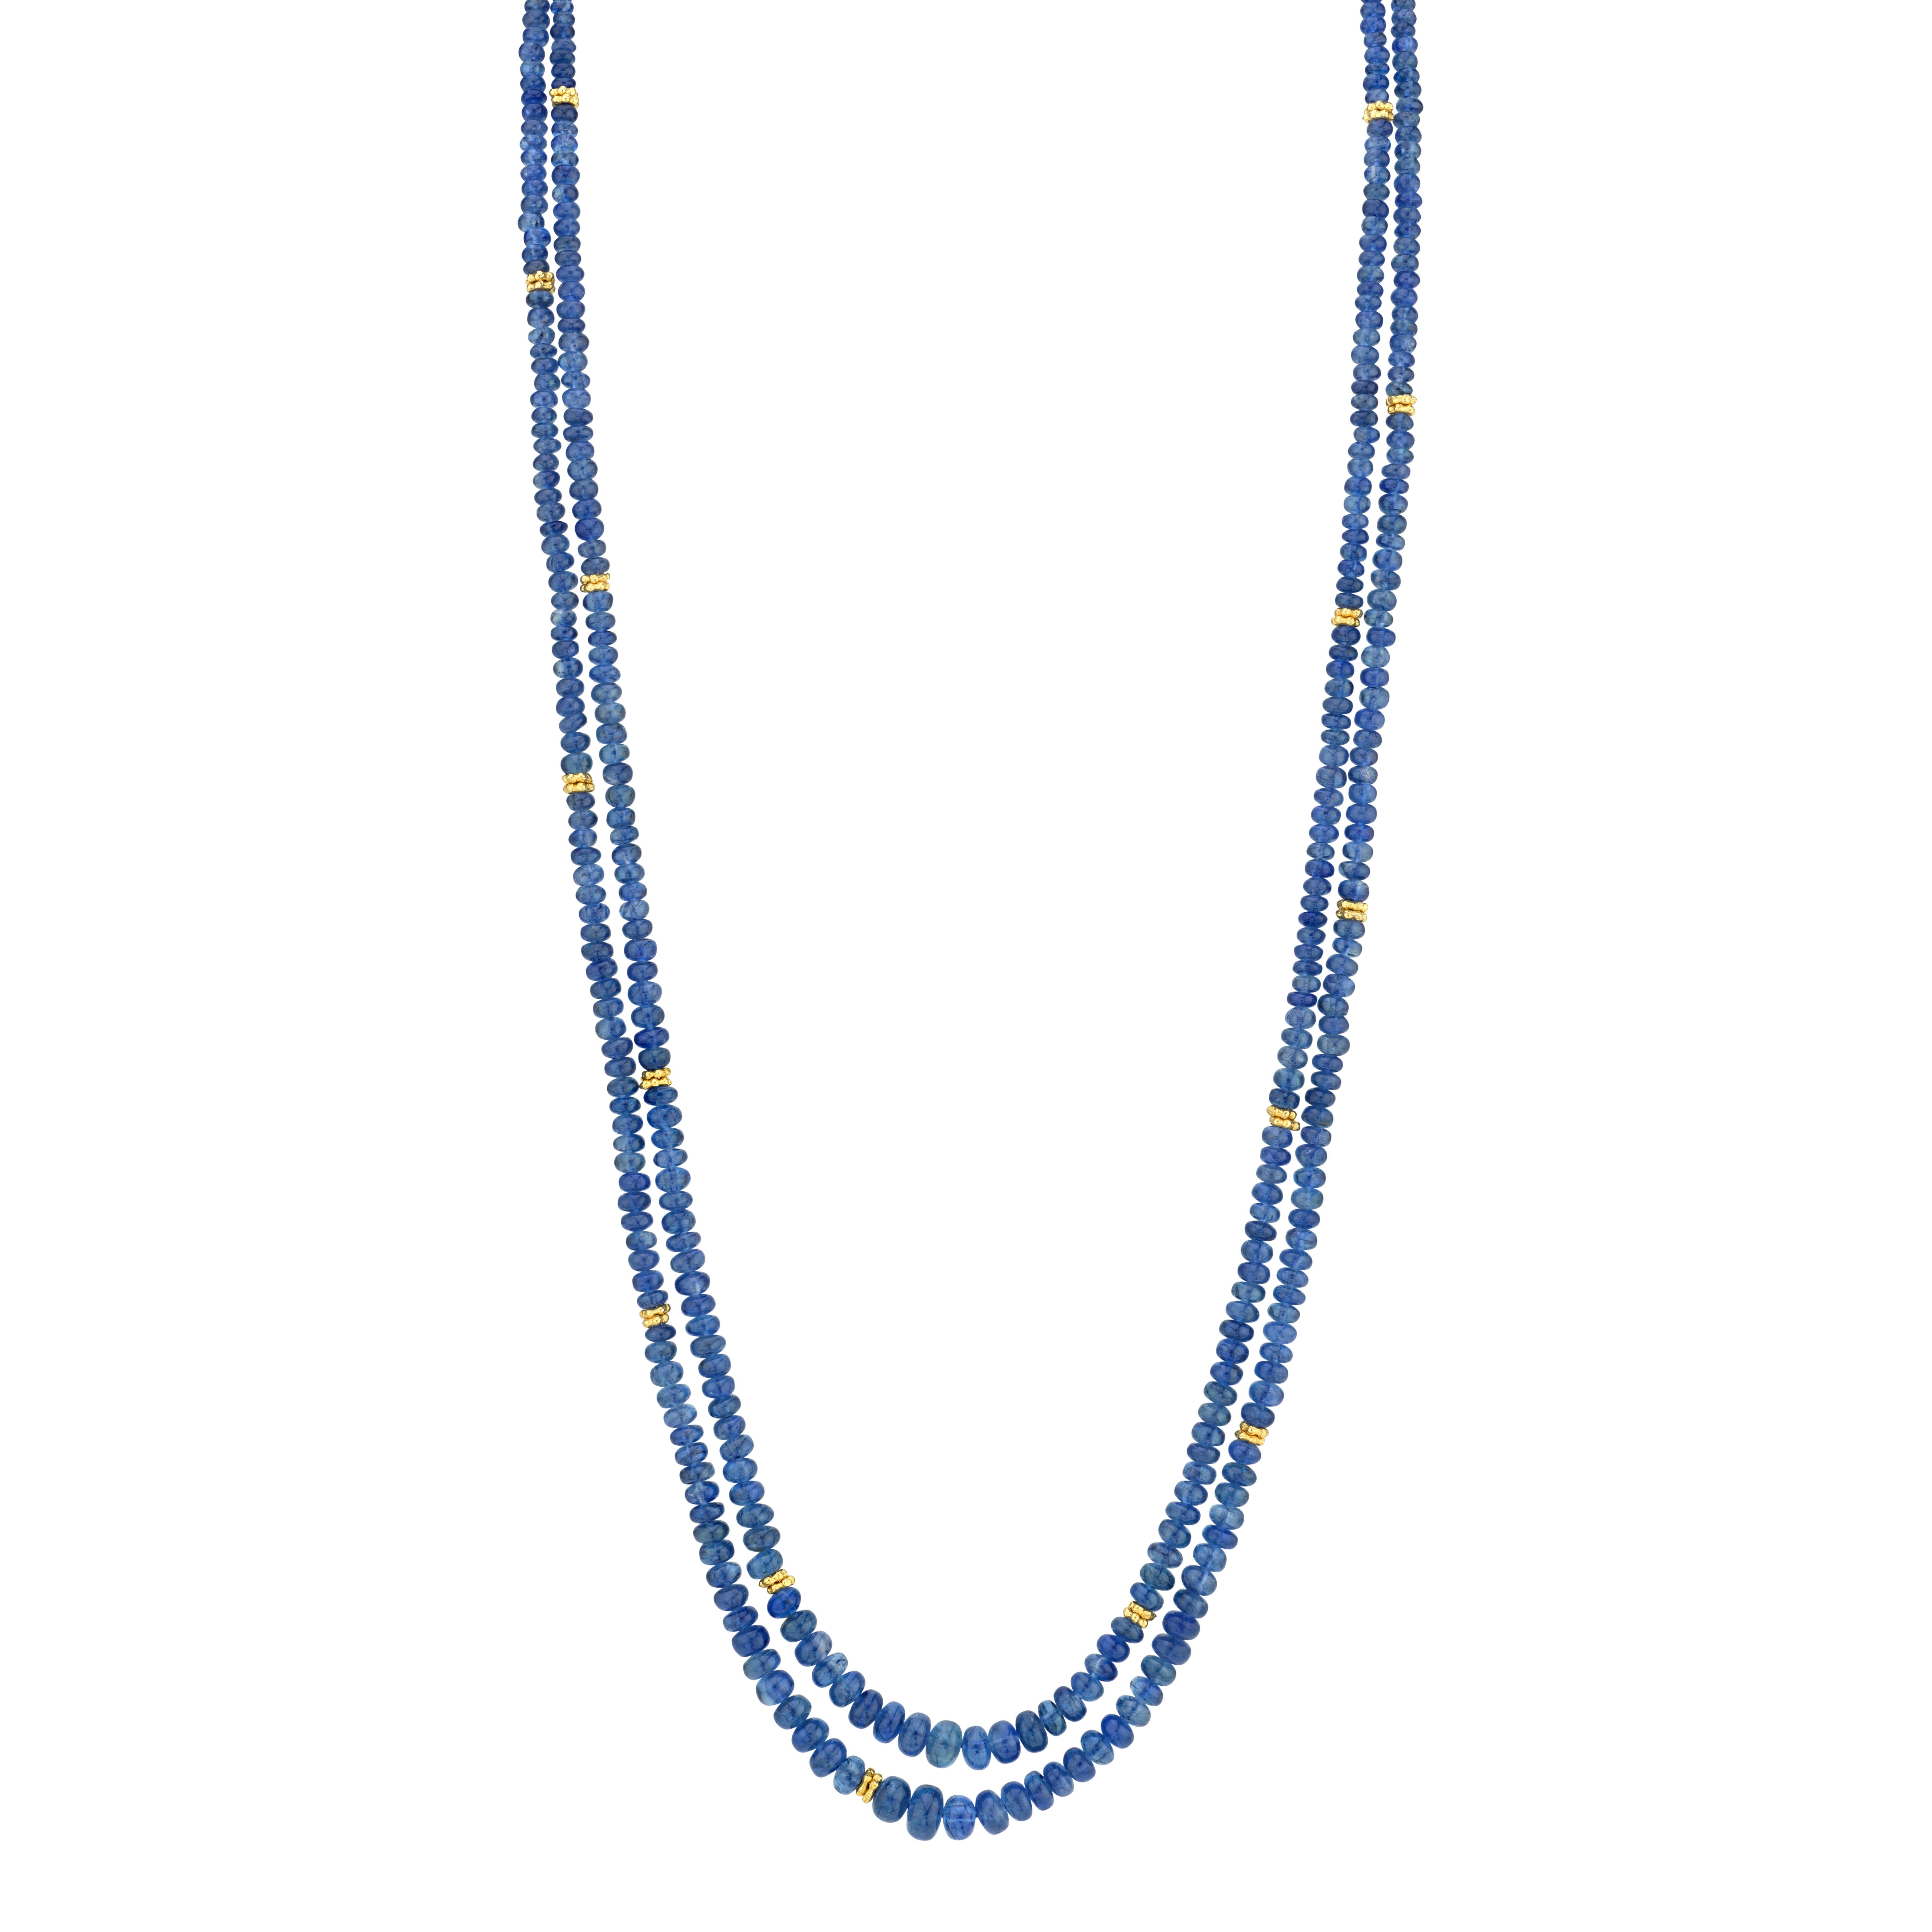 Blue Sapphire Bead, Double Strand Necklace, Yellow Gold Spacers and Clasp 1